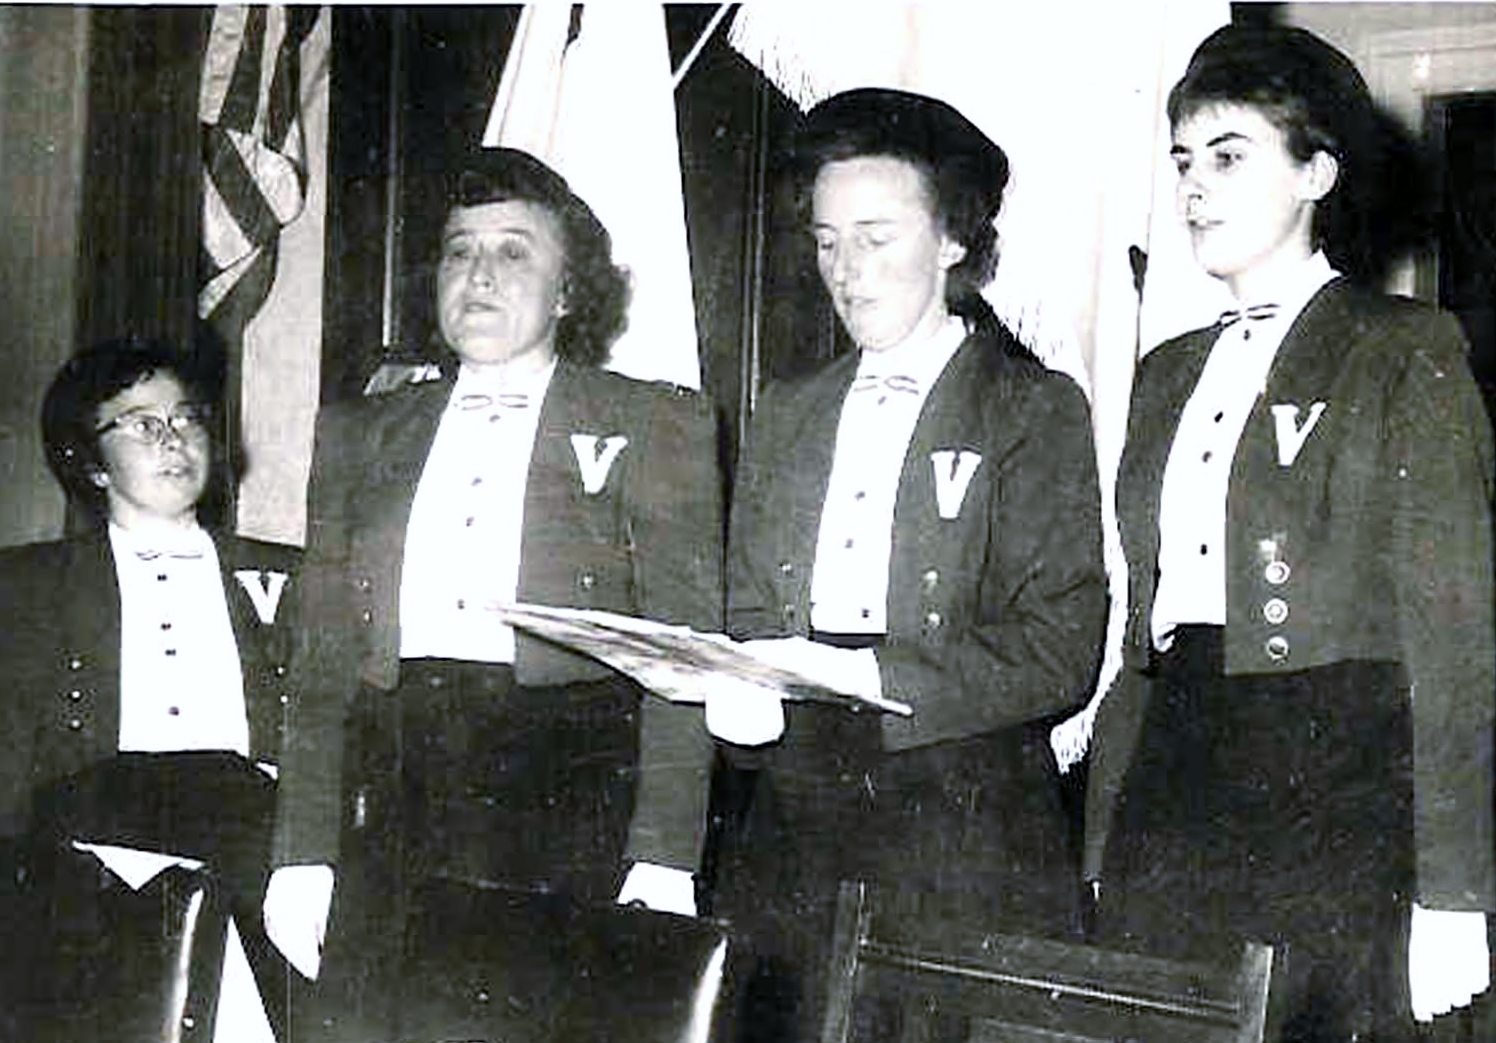 A few of the Australian Rosebud Choir. Miss Roma is second from the left.